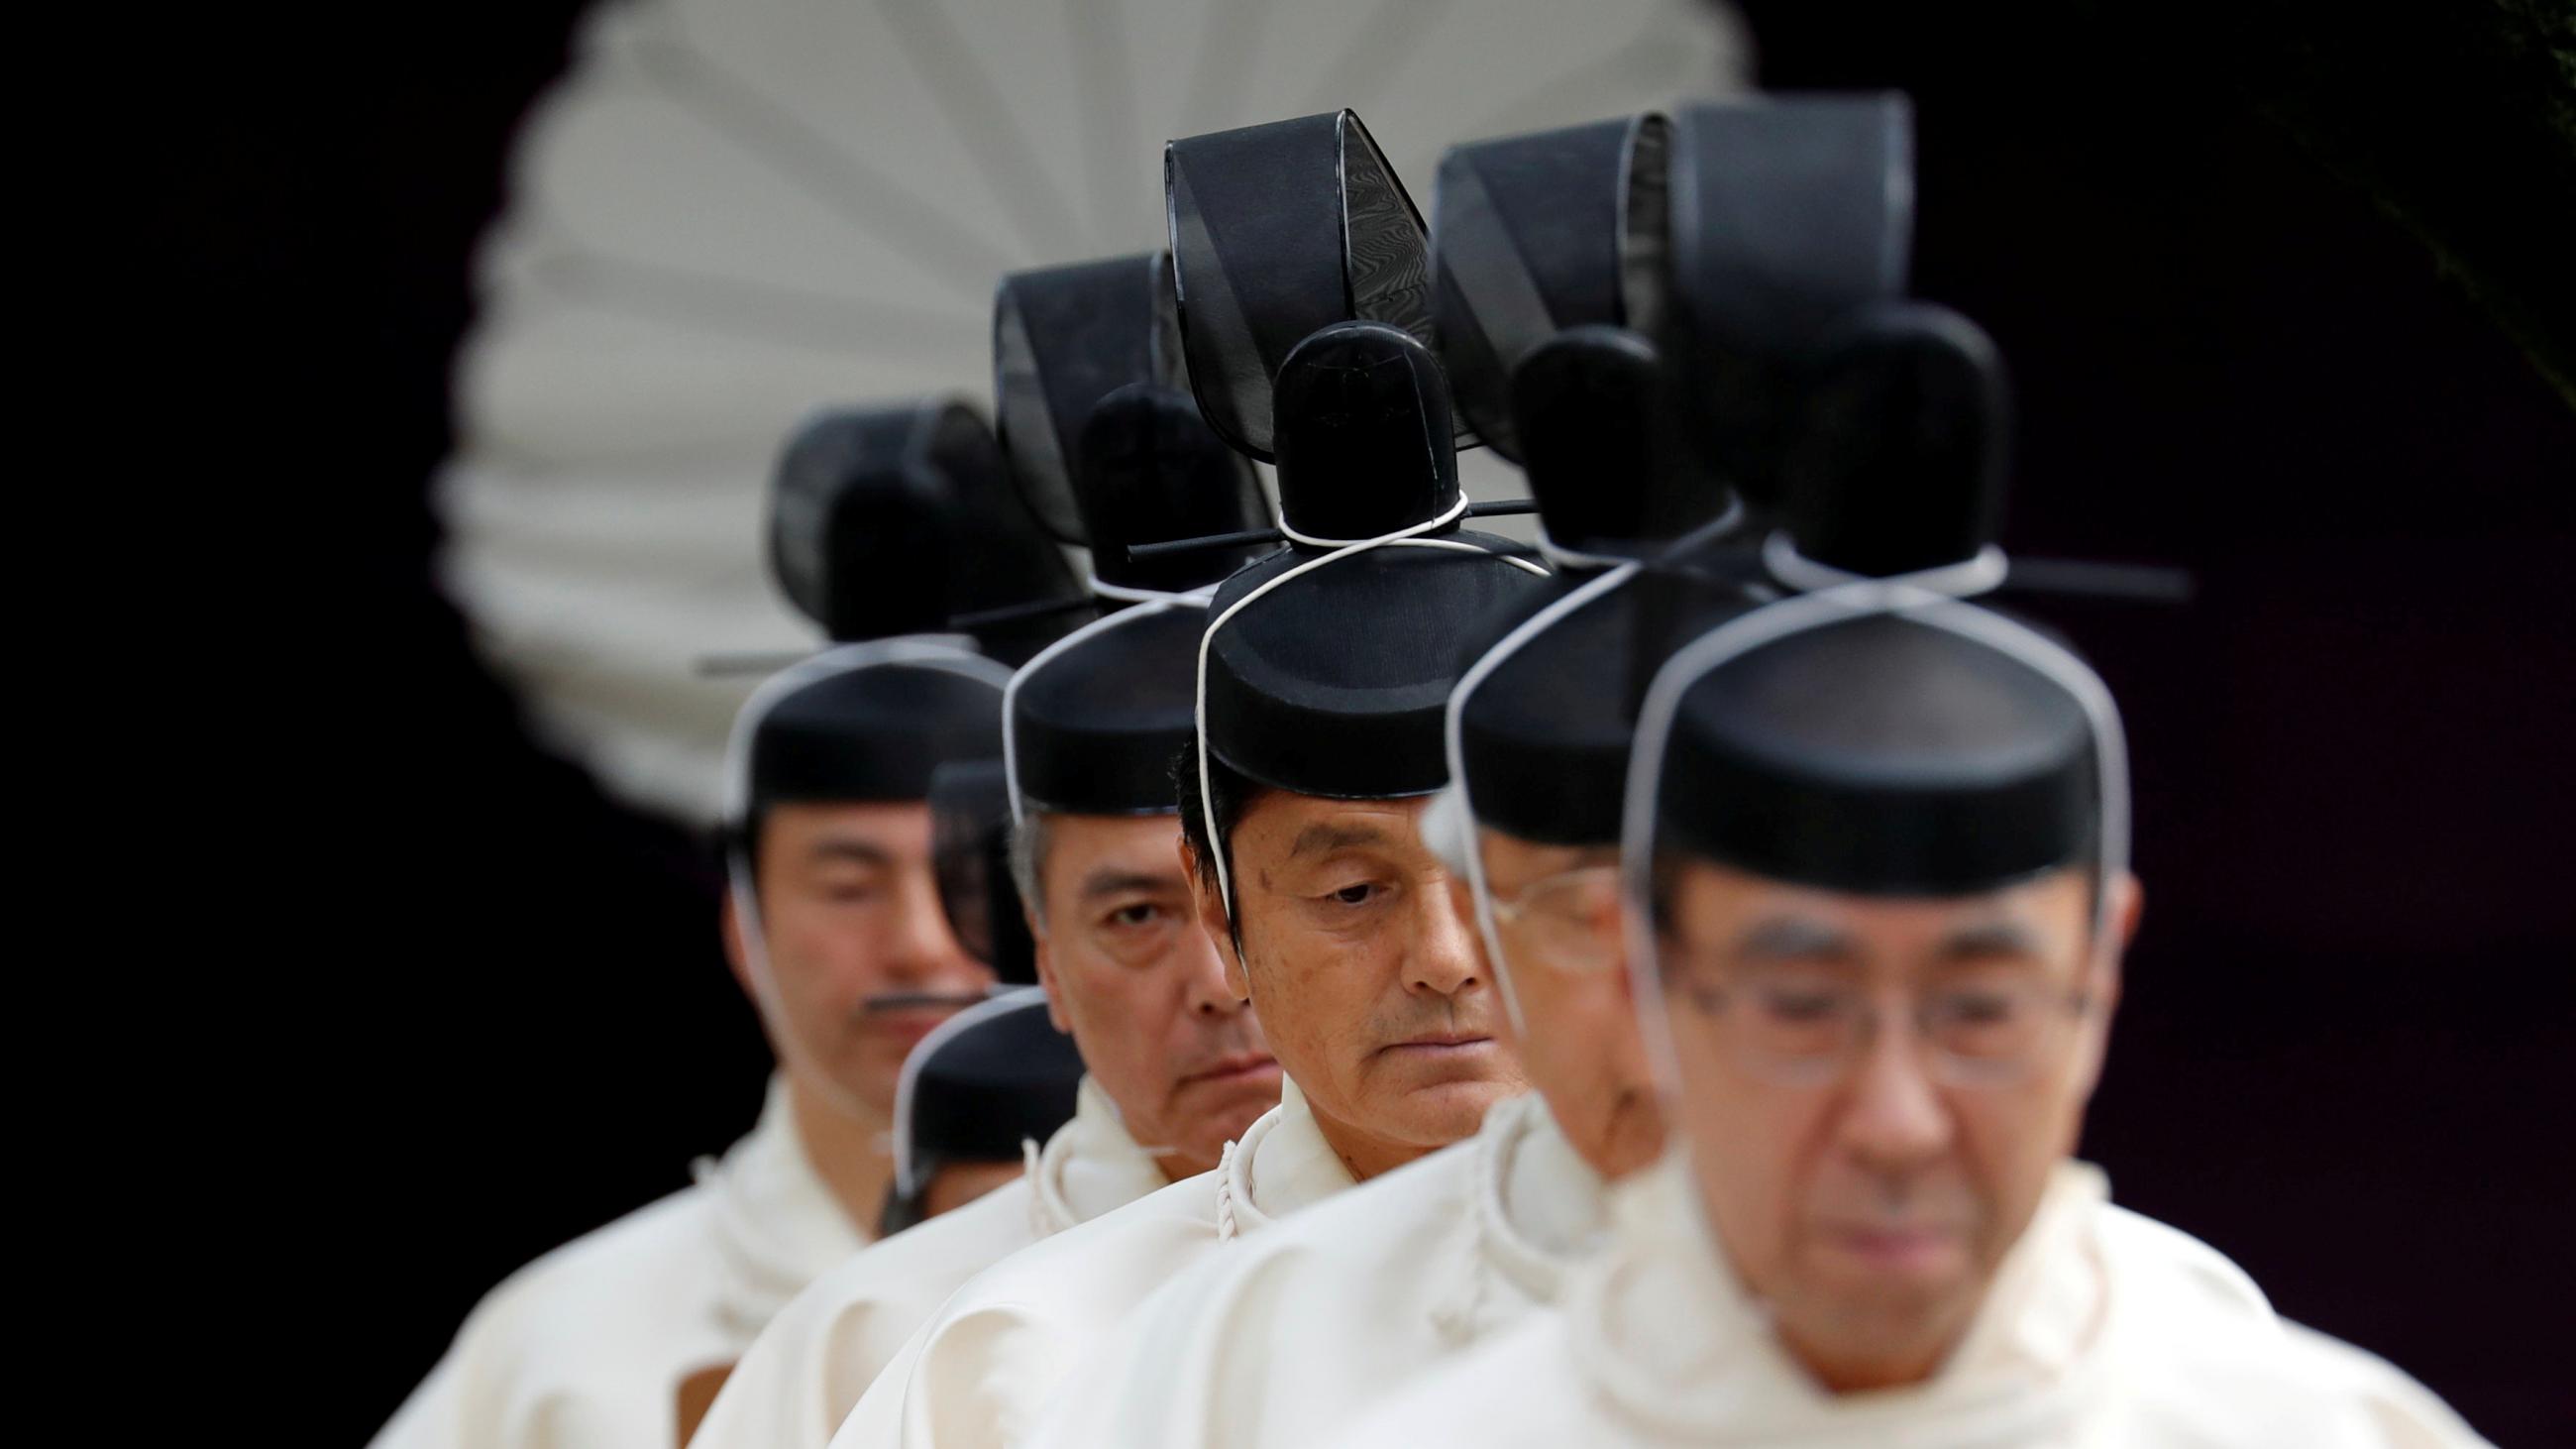 Japanese Shinto priests attend a ritual during an autumn festival at Yasukuni Shrine in Tokyo, Japan October 17, 2017. Formerly a harvest festival, Japan's Labor Thanksgiving Day is celebrated to honor labor, production, and for citizens to give each other thanks.